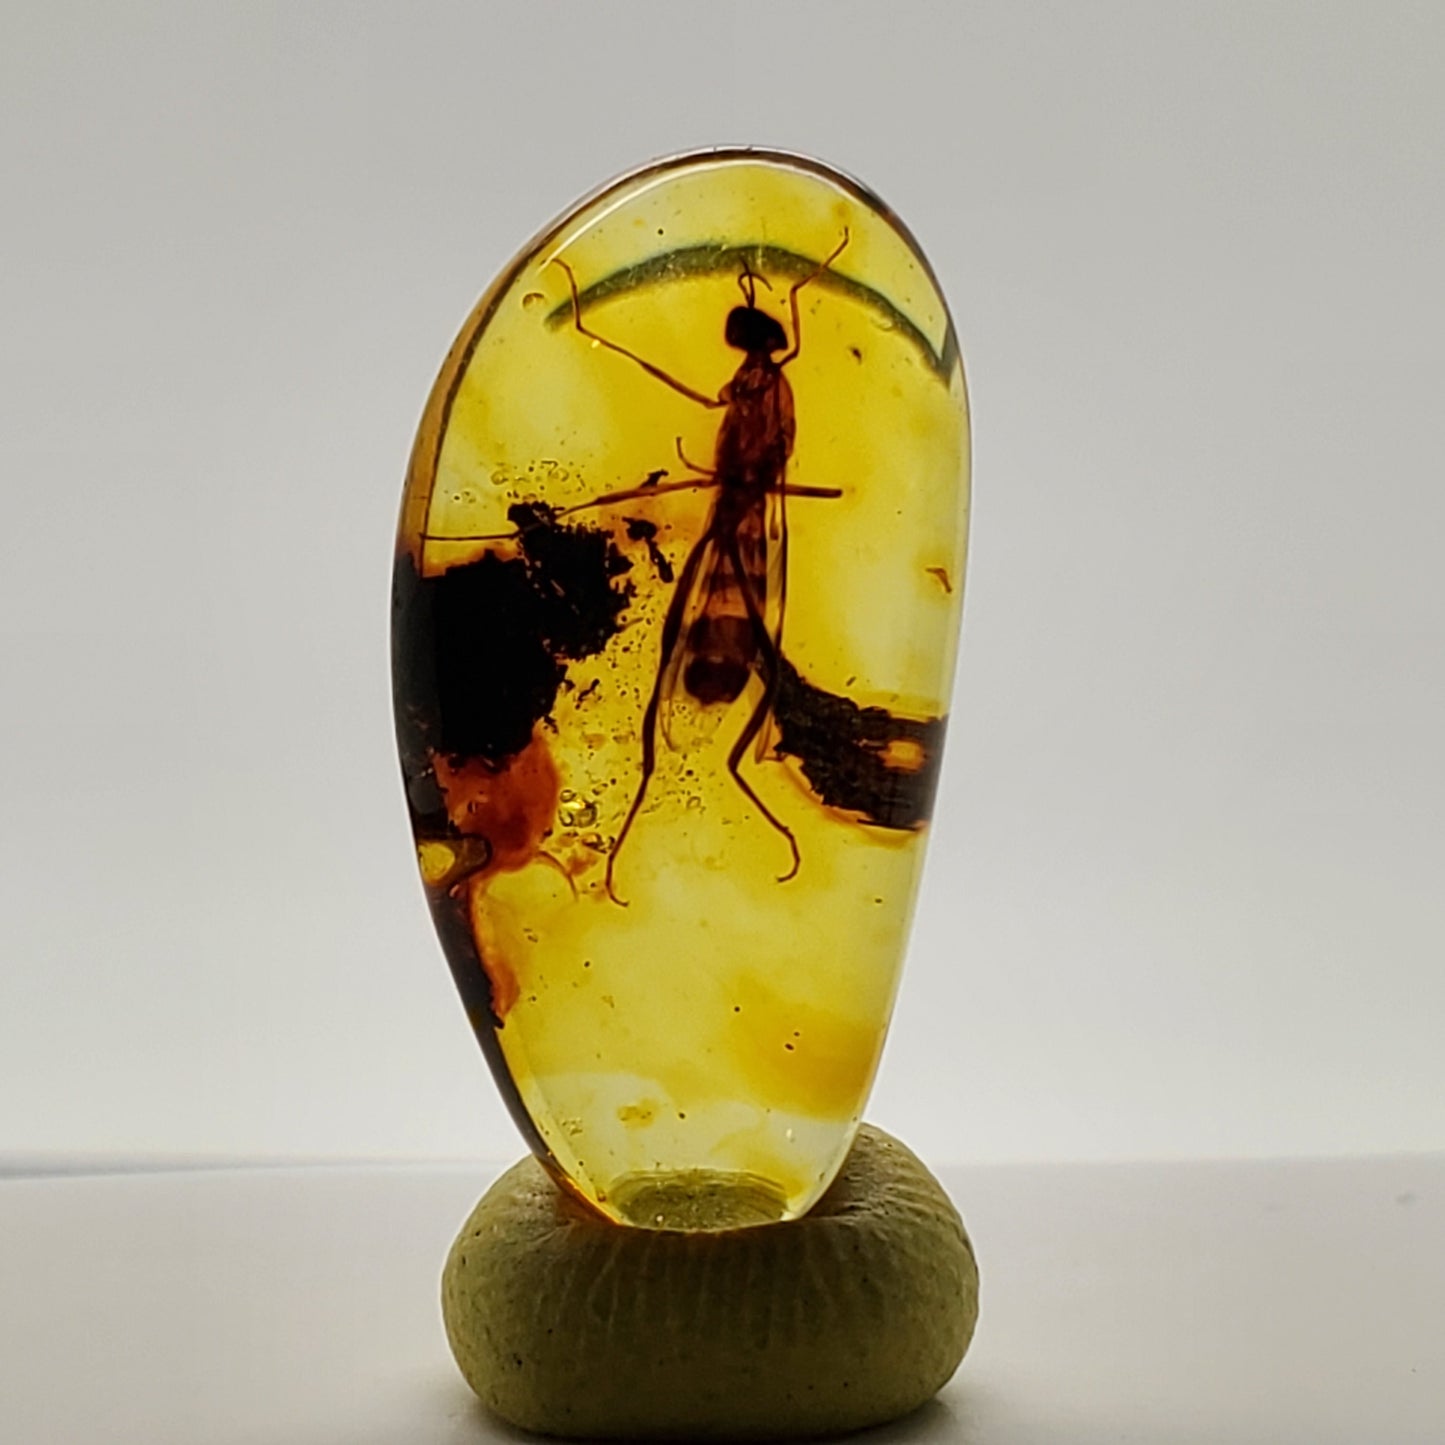 Superb Amber with Insect Inclusion